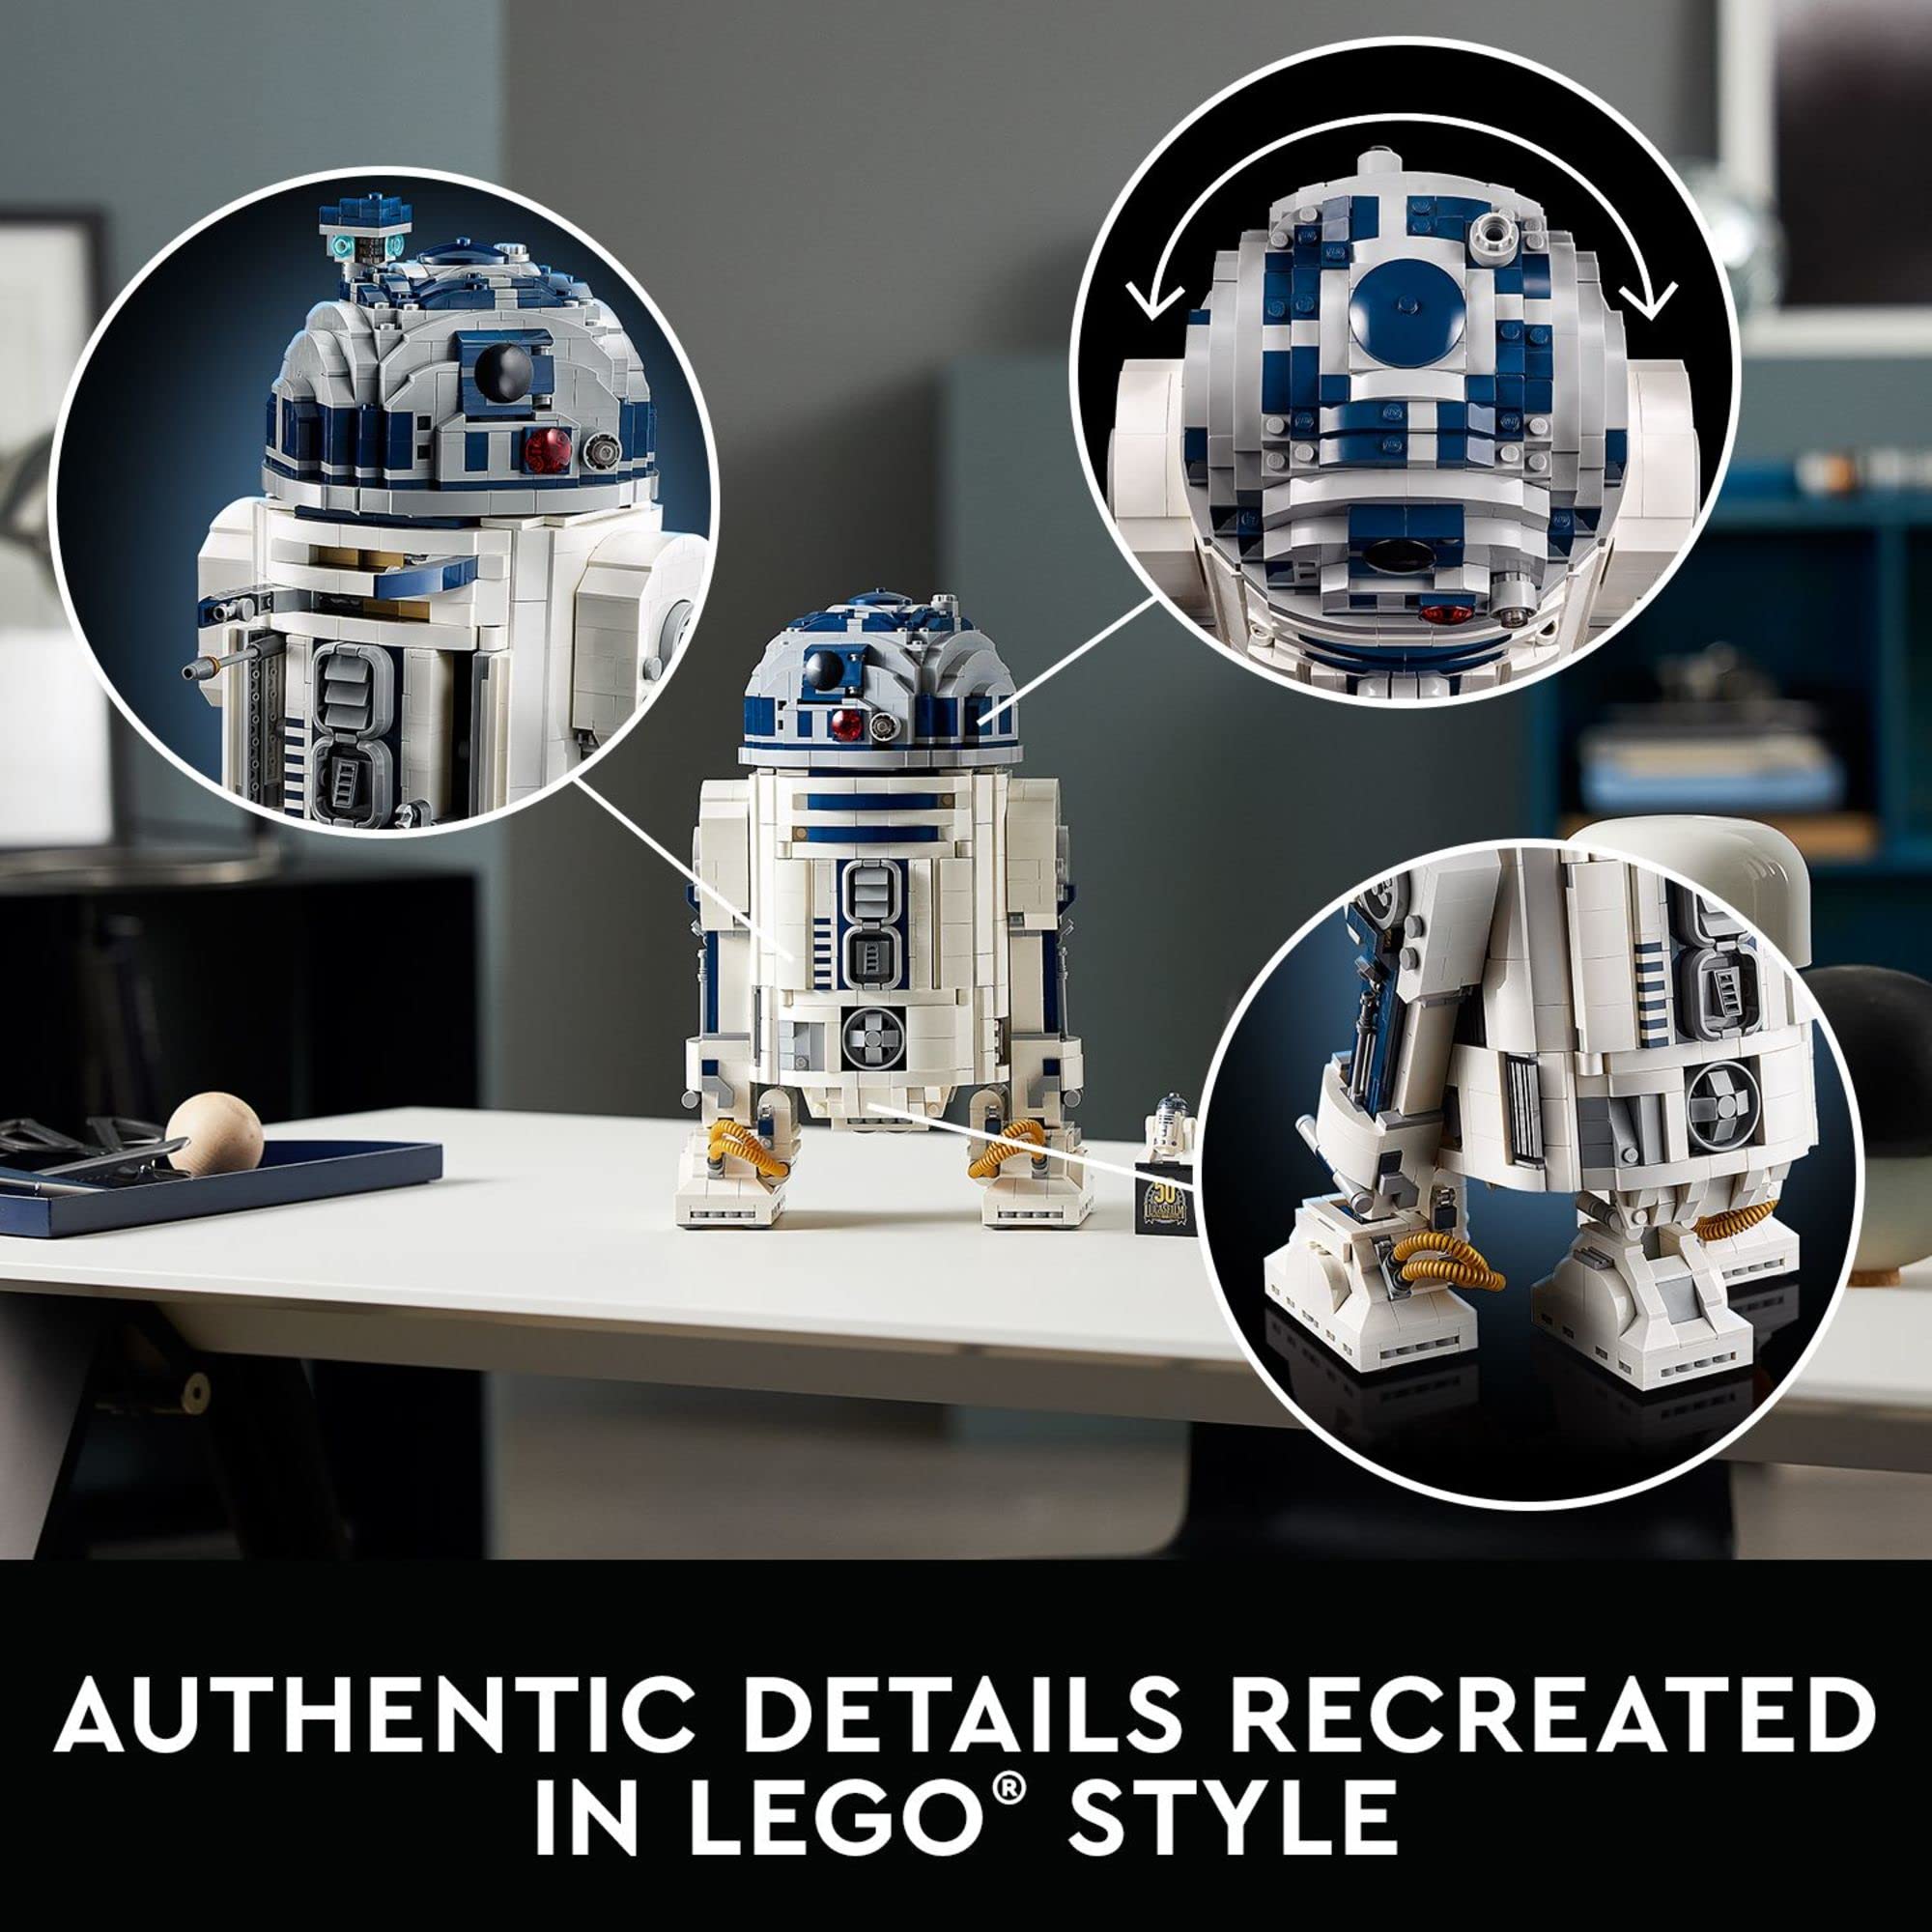 LEGO Star Wars R2-D2 75308 Droid Building Set for Adults, Collectible Display Model with Luke Skywalker’s Lightsaber, Great Birthday for Husbands, Wives, Any Star Wars Fans